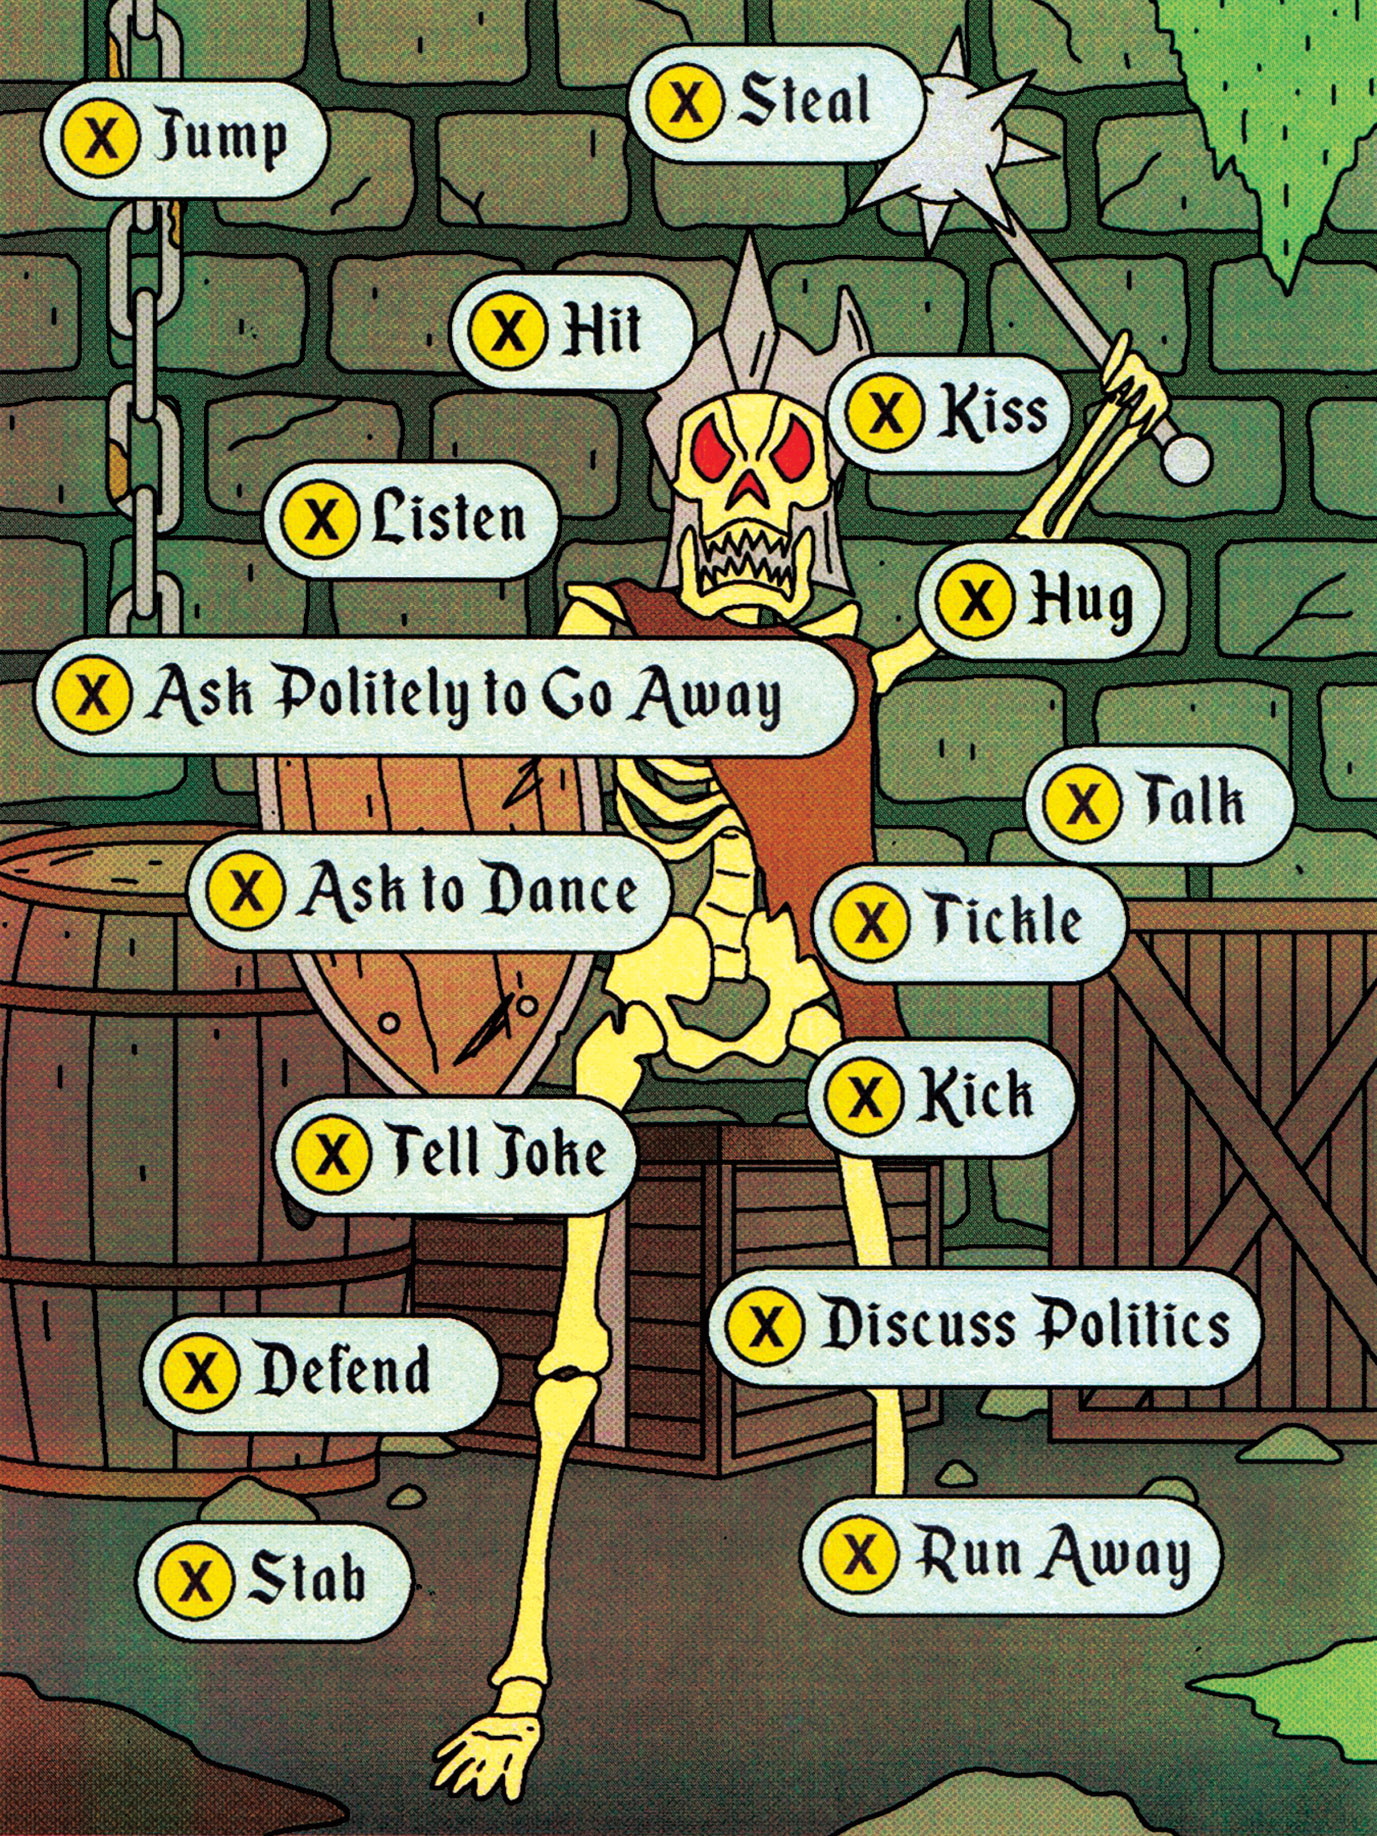 a skeleton wielding a mace is partially obscured by possible interaction cues, such as "Listen," "Kiss," "Ask Politely to go away" and "Tell Joke"